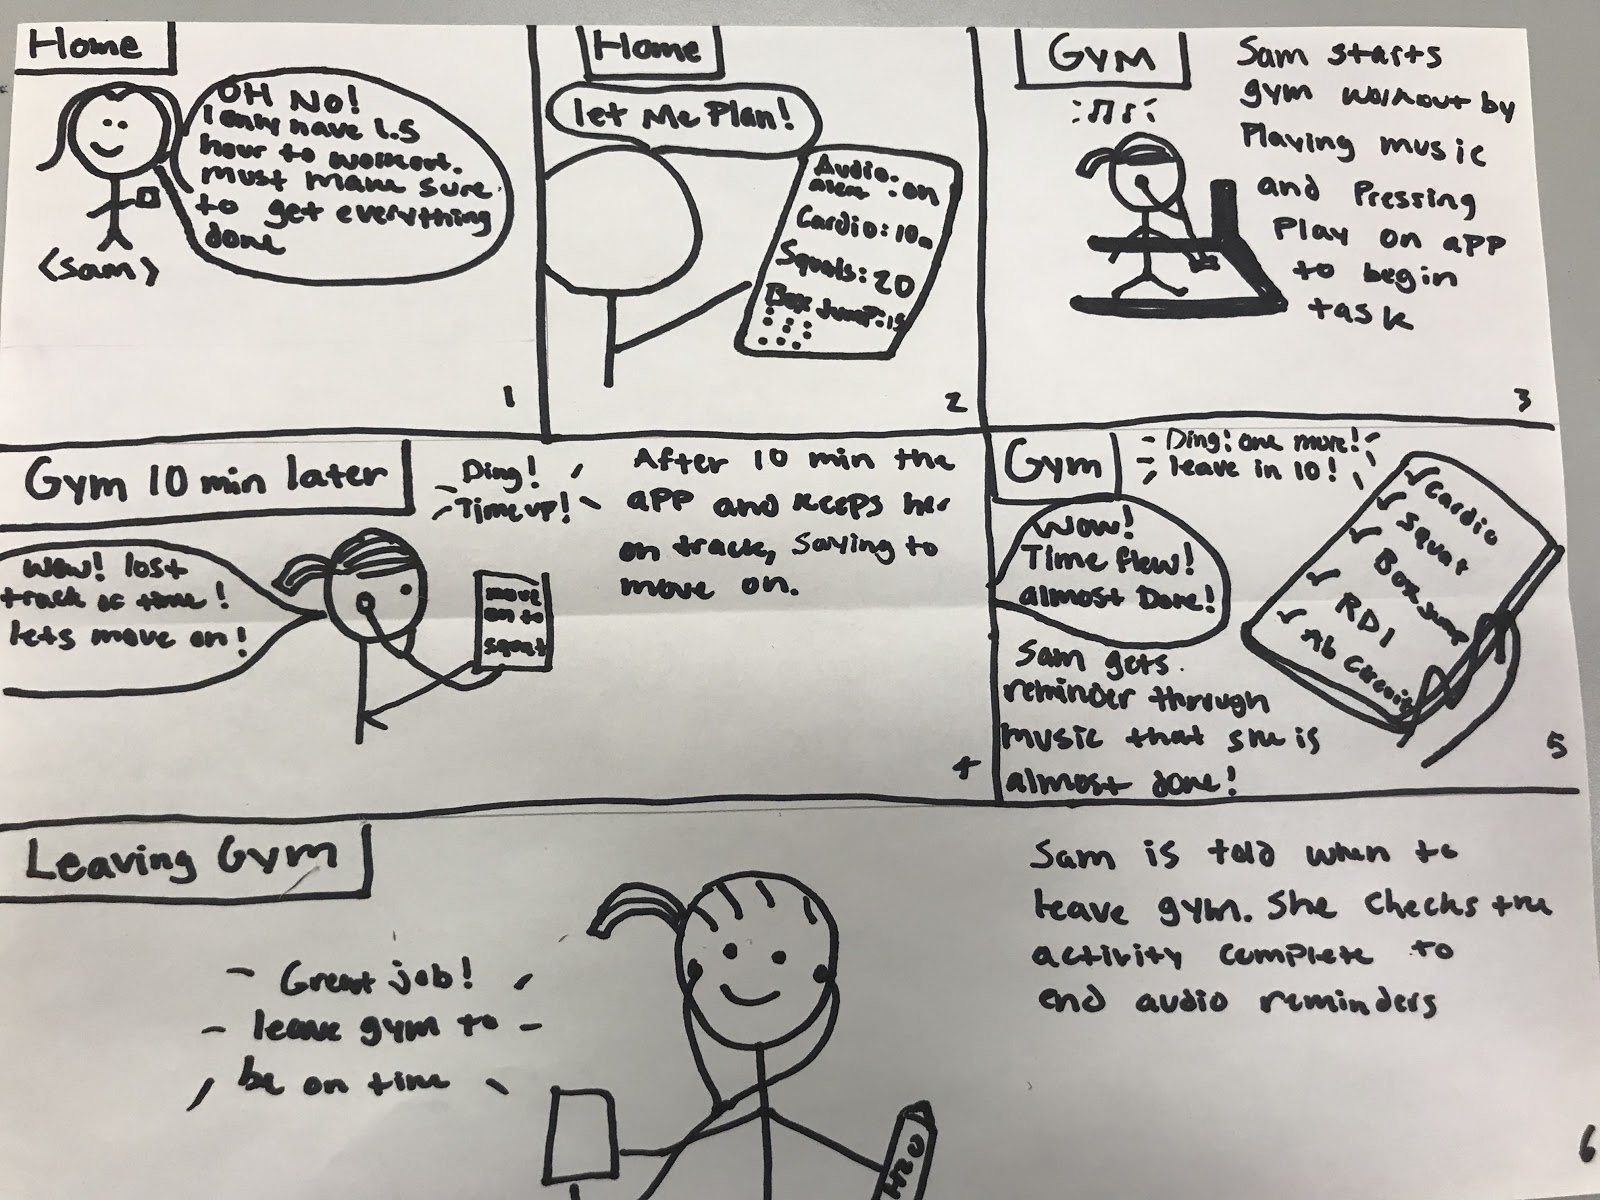 Storyboard for using Temporal when exercising